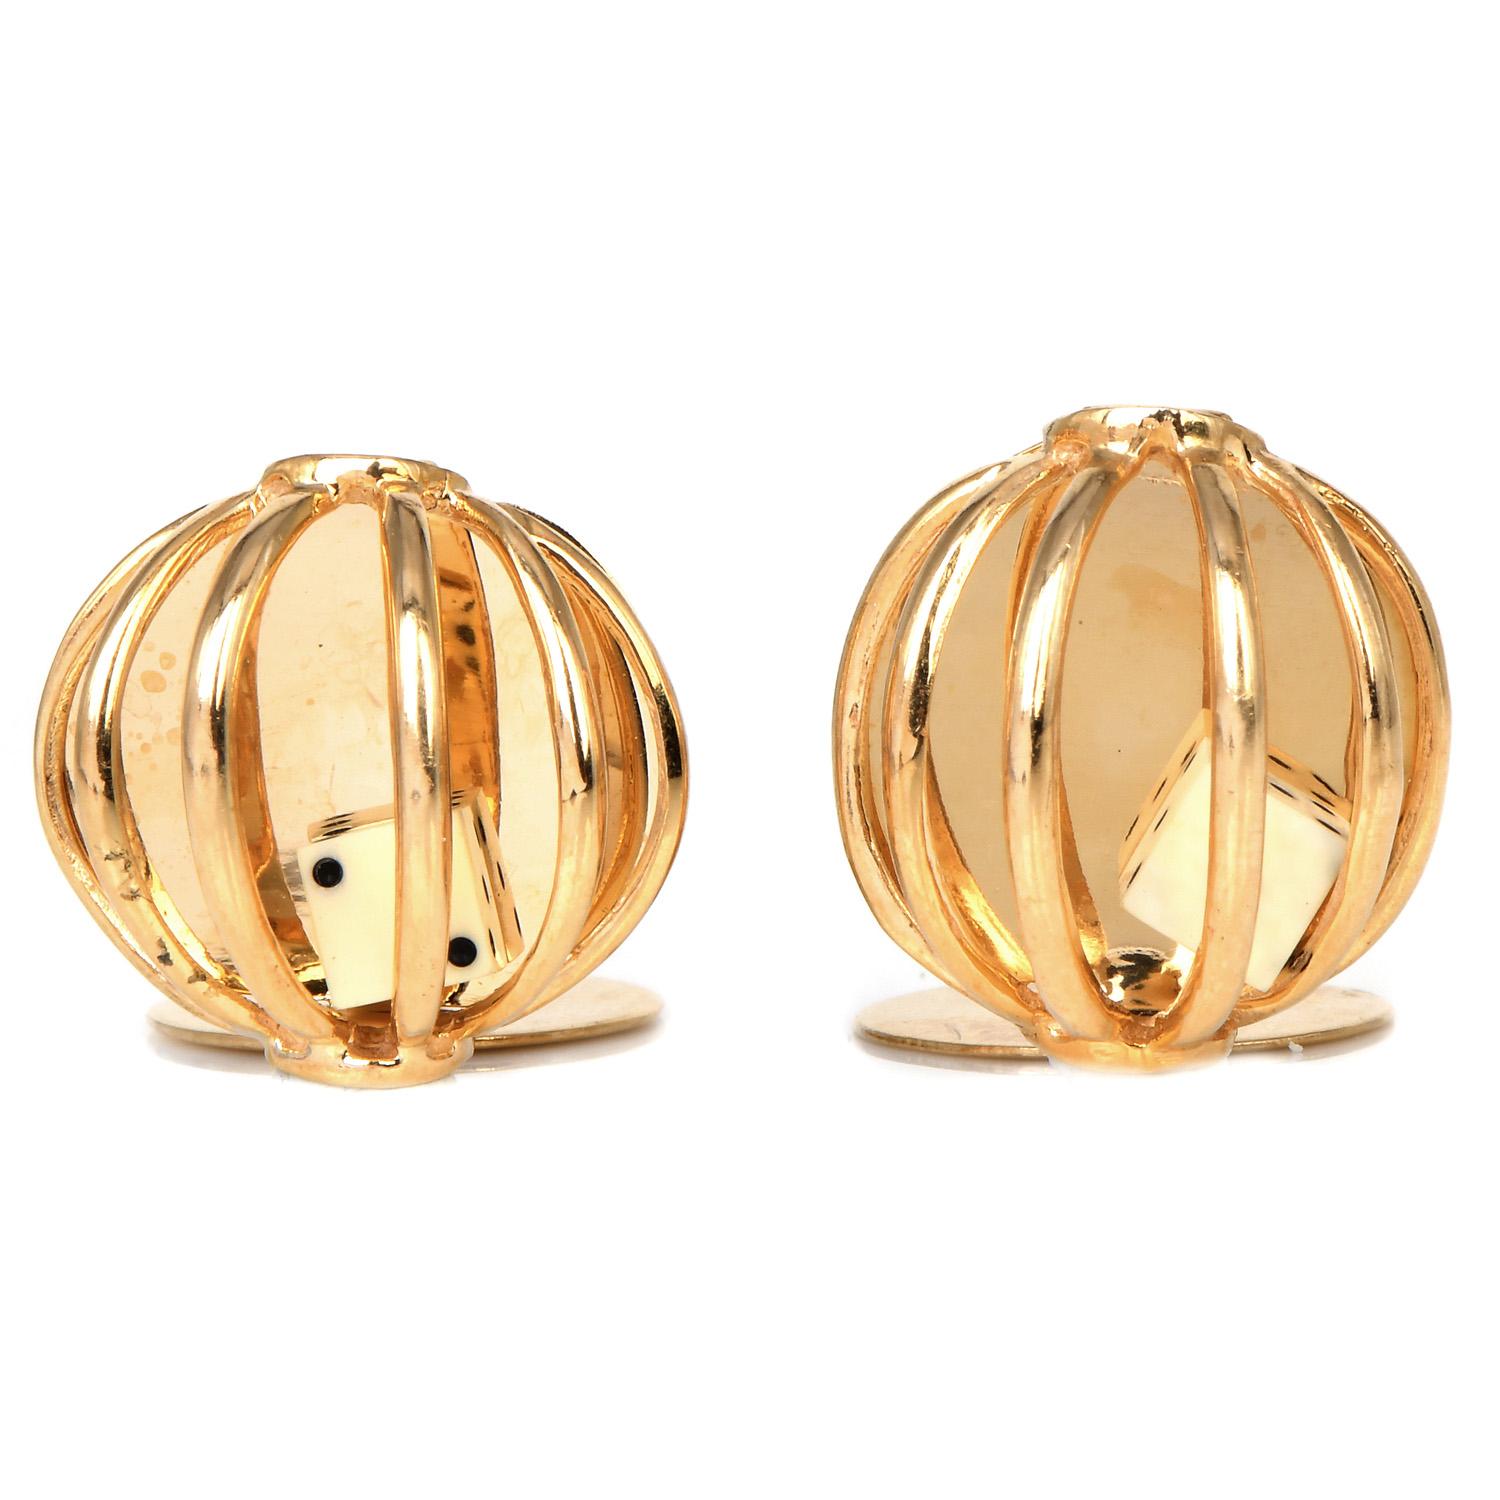 Living the Casino Royale experience with these unique cufflinks.

These Lucky cufflinks are Crafted in highly polished 14K Yellow Gold.

Features 2 center, stone-carved, and enameled Dice motif charms dangling from the inner cage-like style top